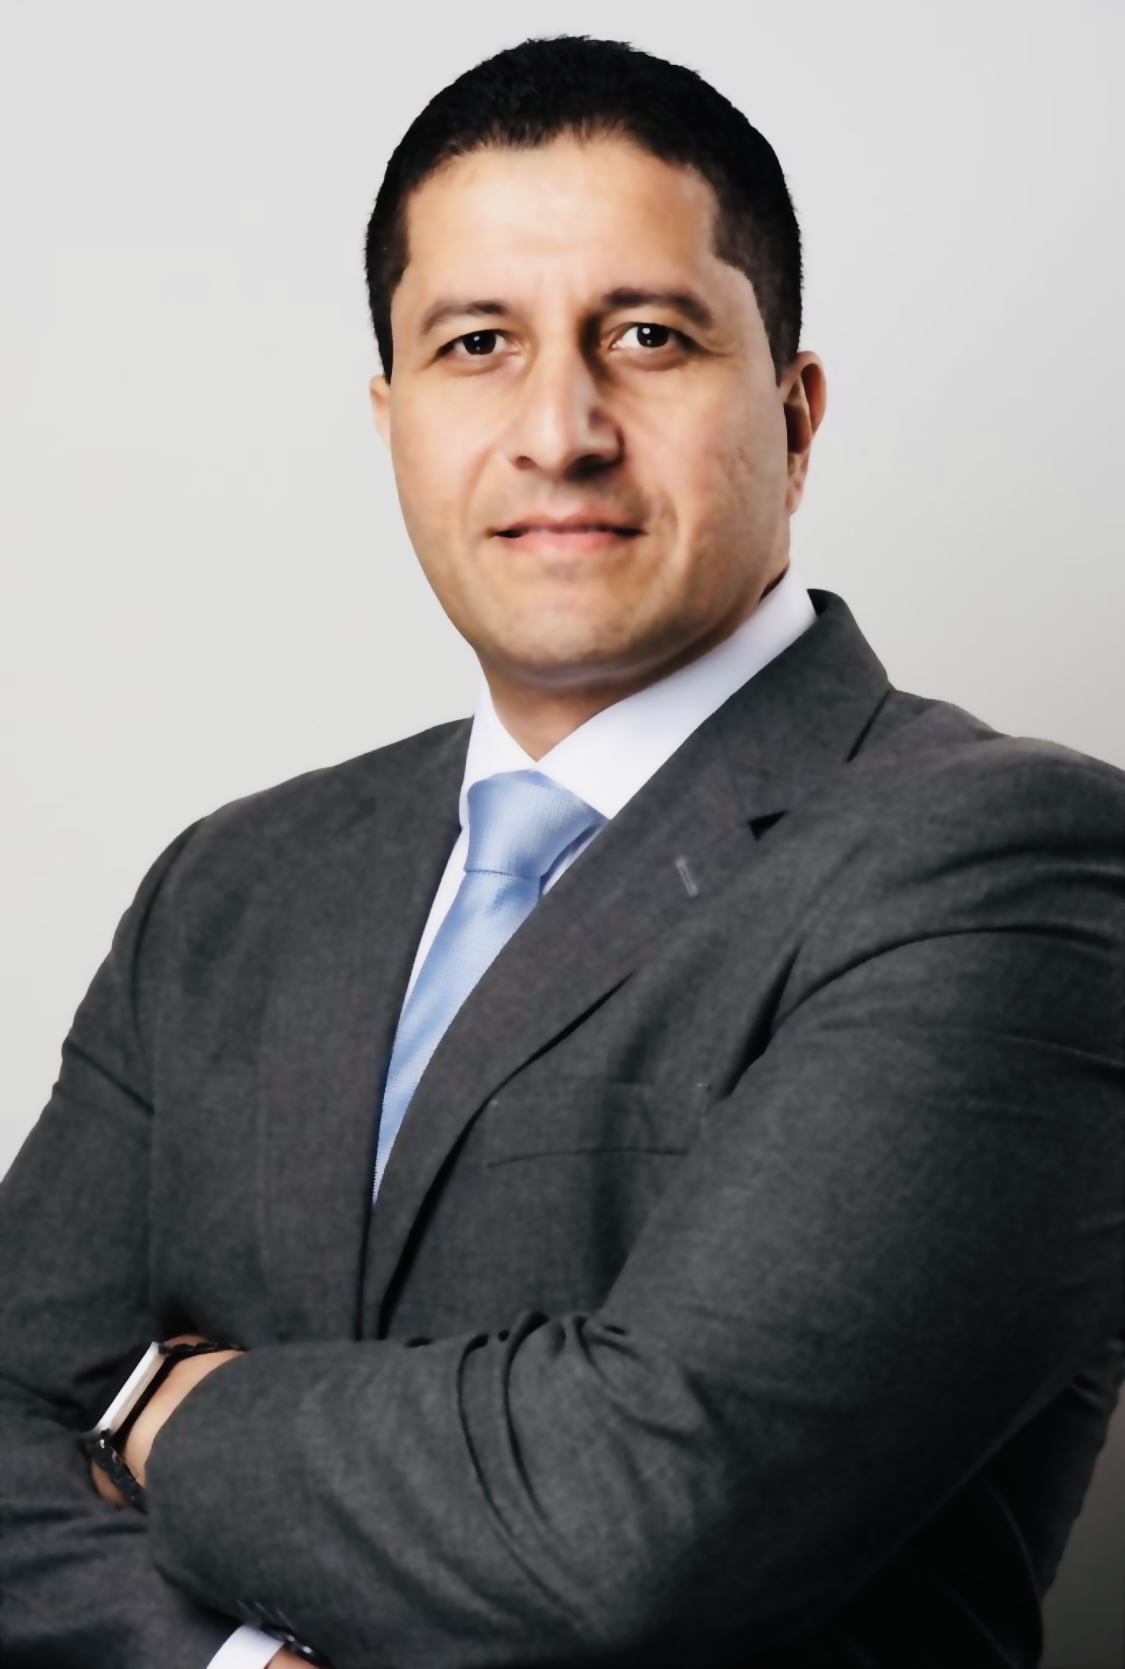 Portrait photo of Dr Naz, wearing a dark suit, white shirt and blue tie.